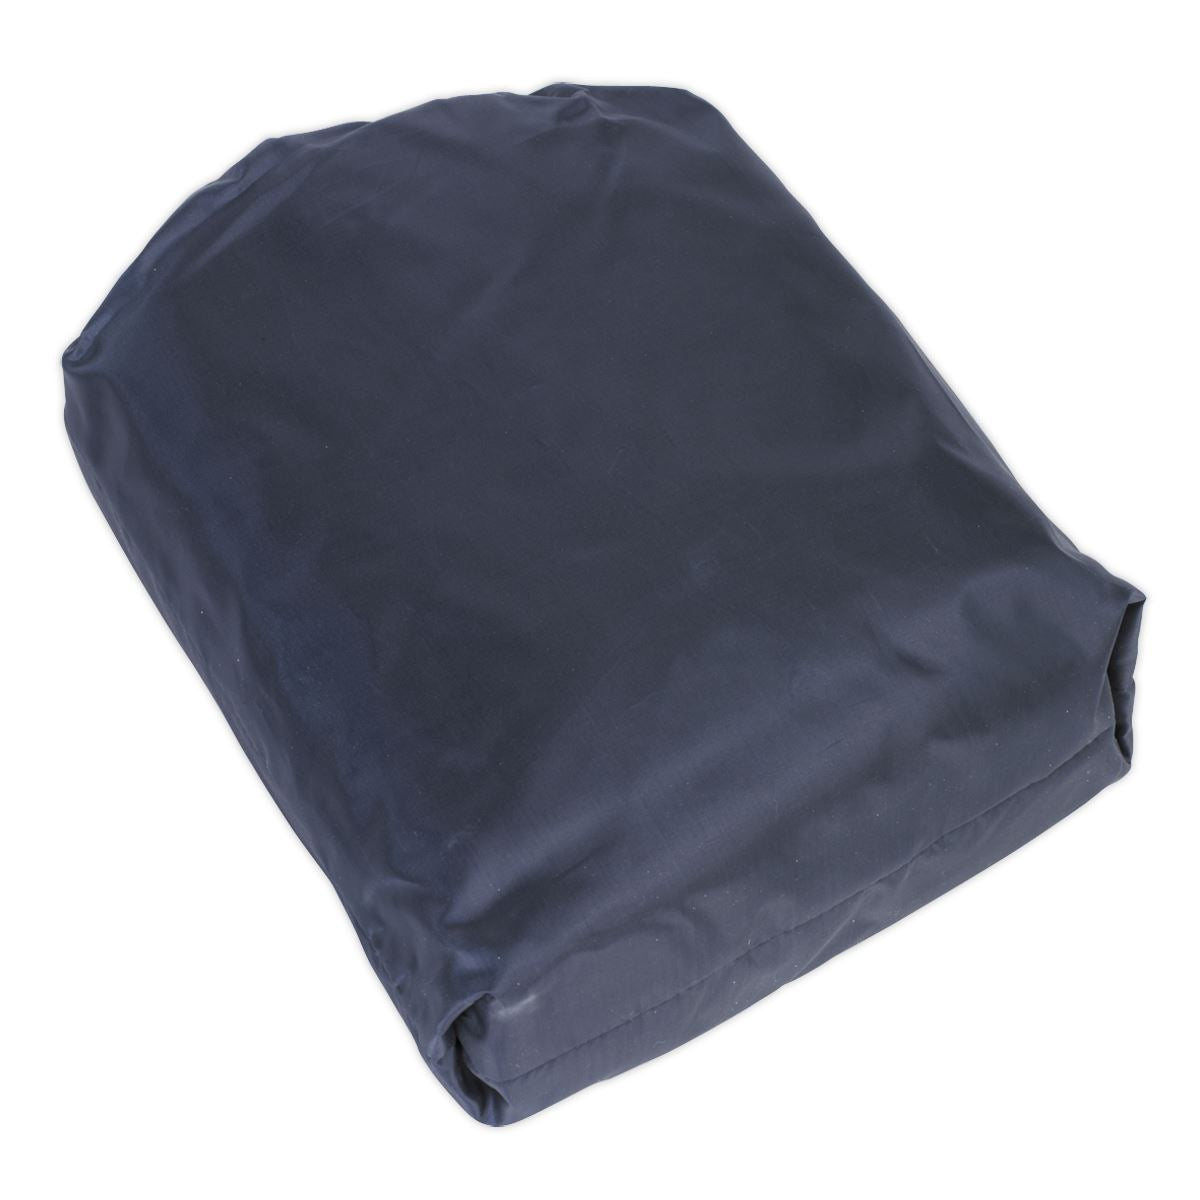 Sealey Car Cover Lightweight Small 3800 x 1540 x 1190mm